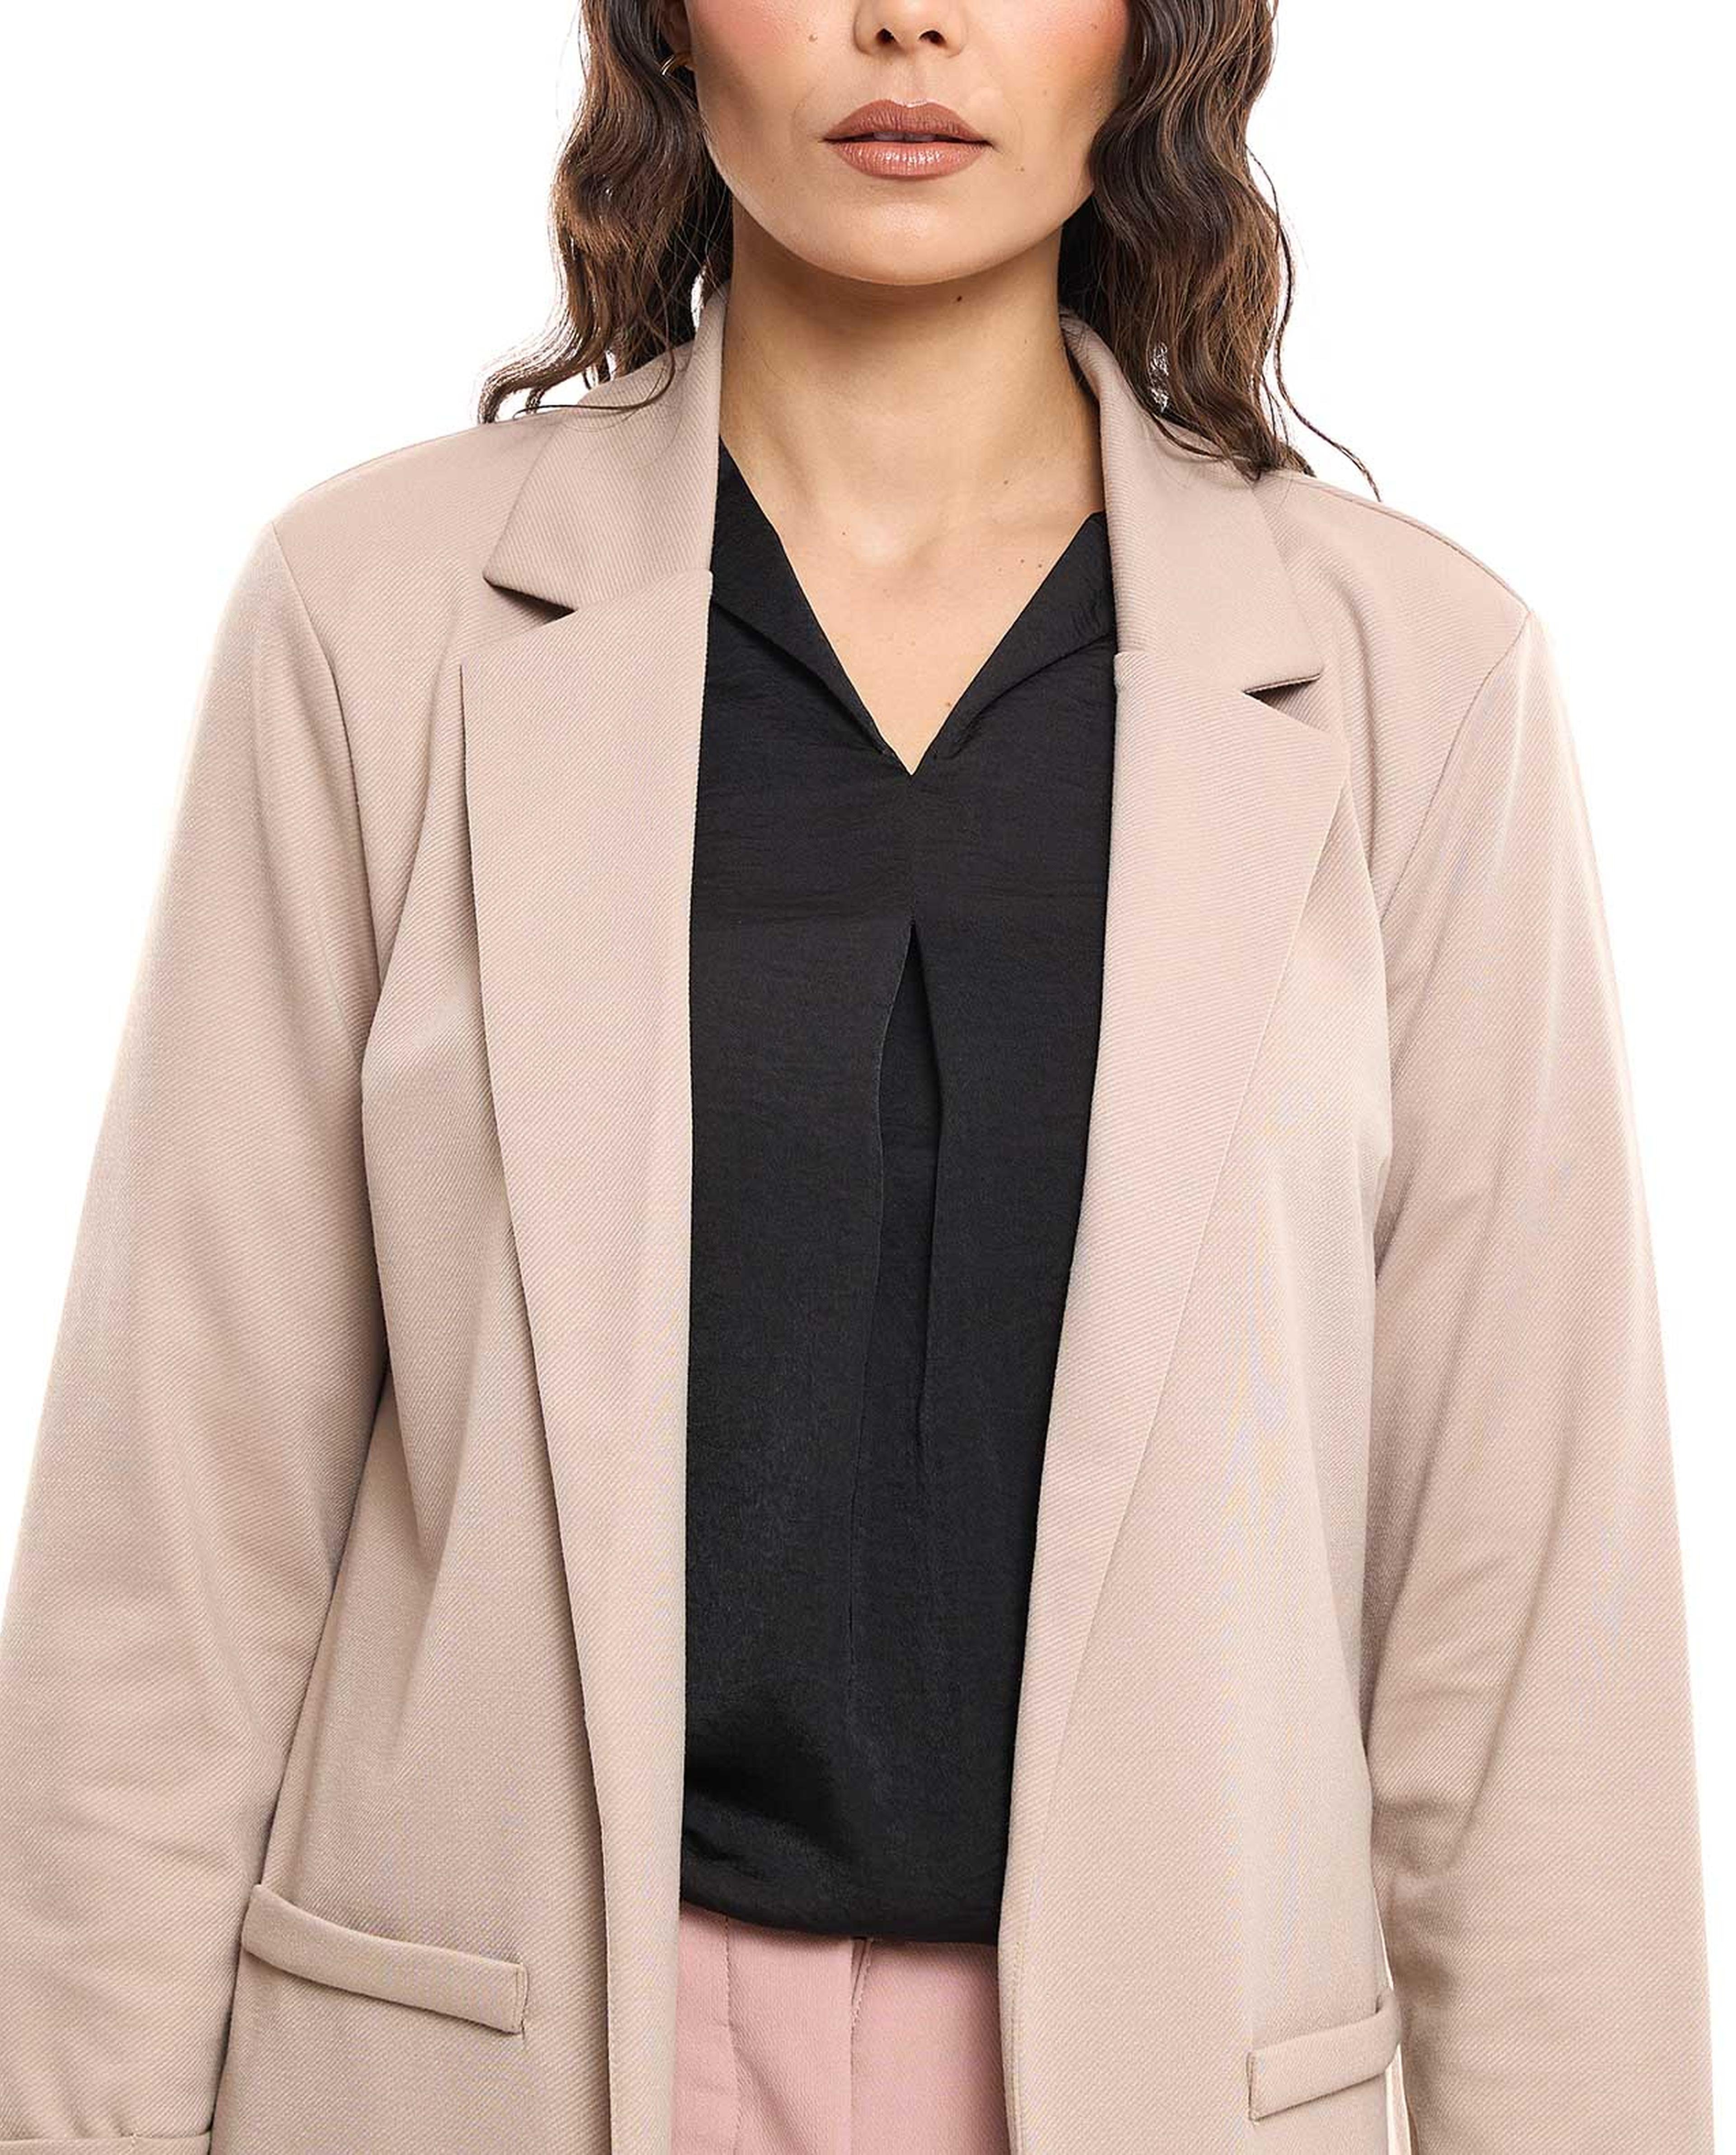 Solid Blazer with Lapel Collar and 3/4 Sleeves